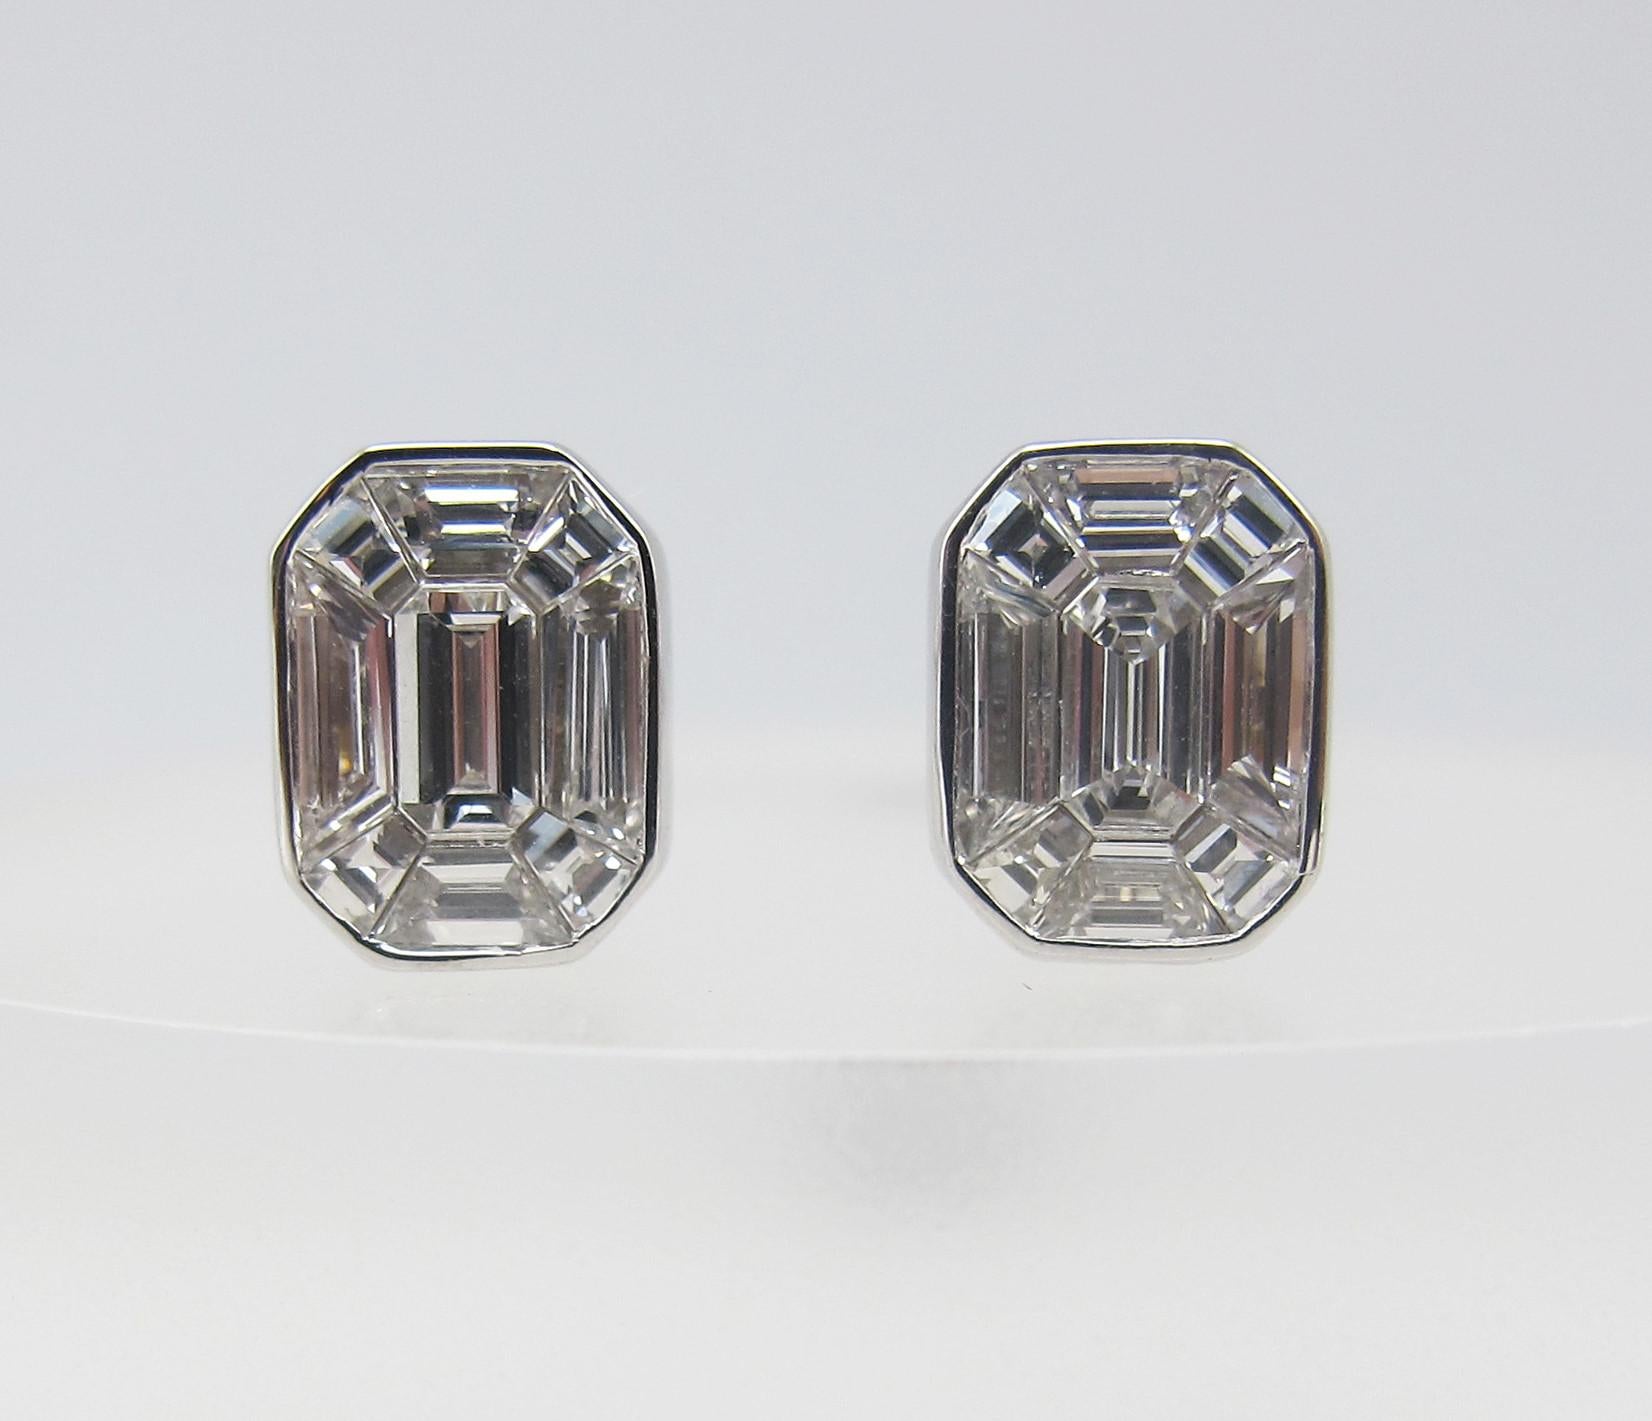 From the vault at Emilio Jewelry New York,
a diamond stud earring where all the emerald cuts blend as one creating an illusion diamond stud visual of a gigantic single diamond on each ear! 18 Pieces Pie Cut Emerald Shape D-G Color VVS-VS Clarity